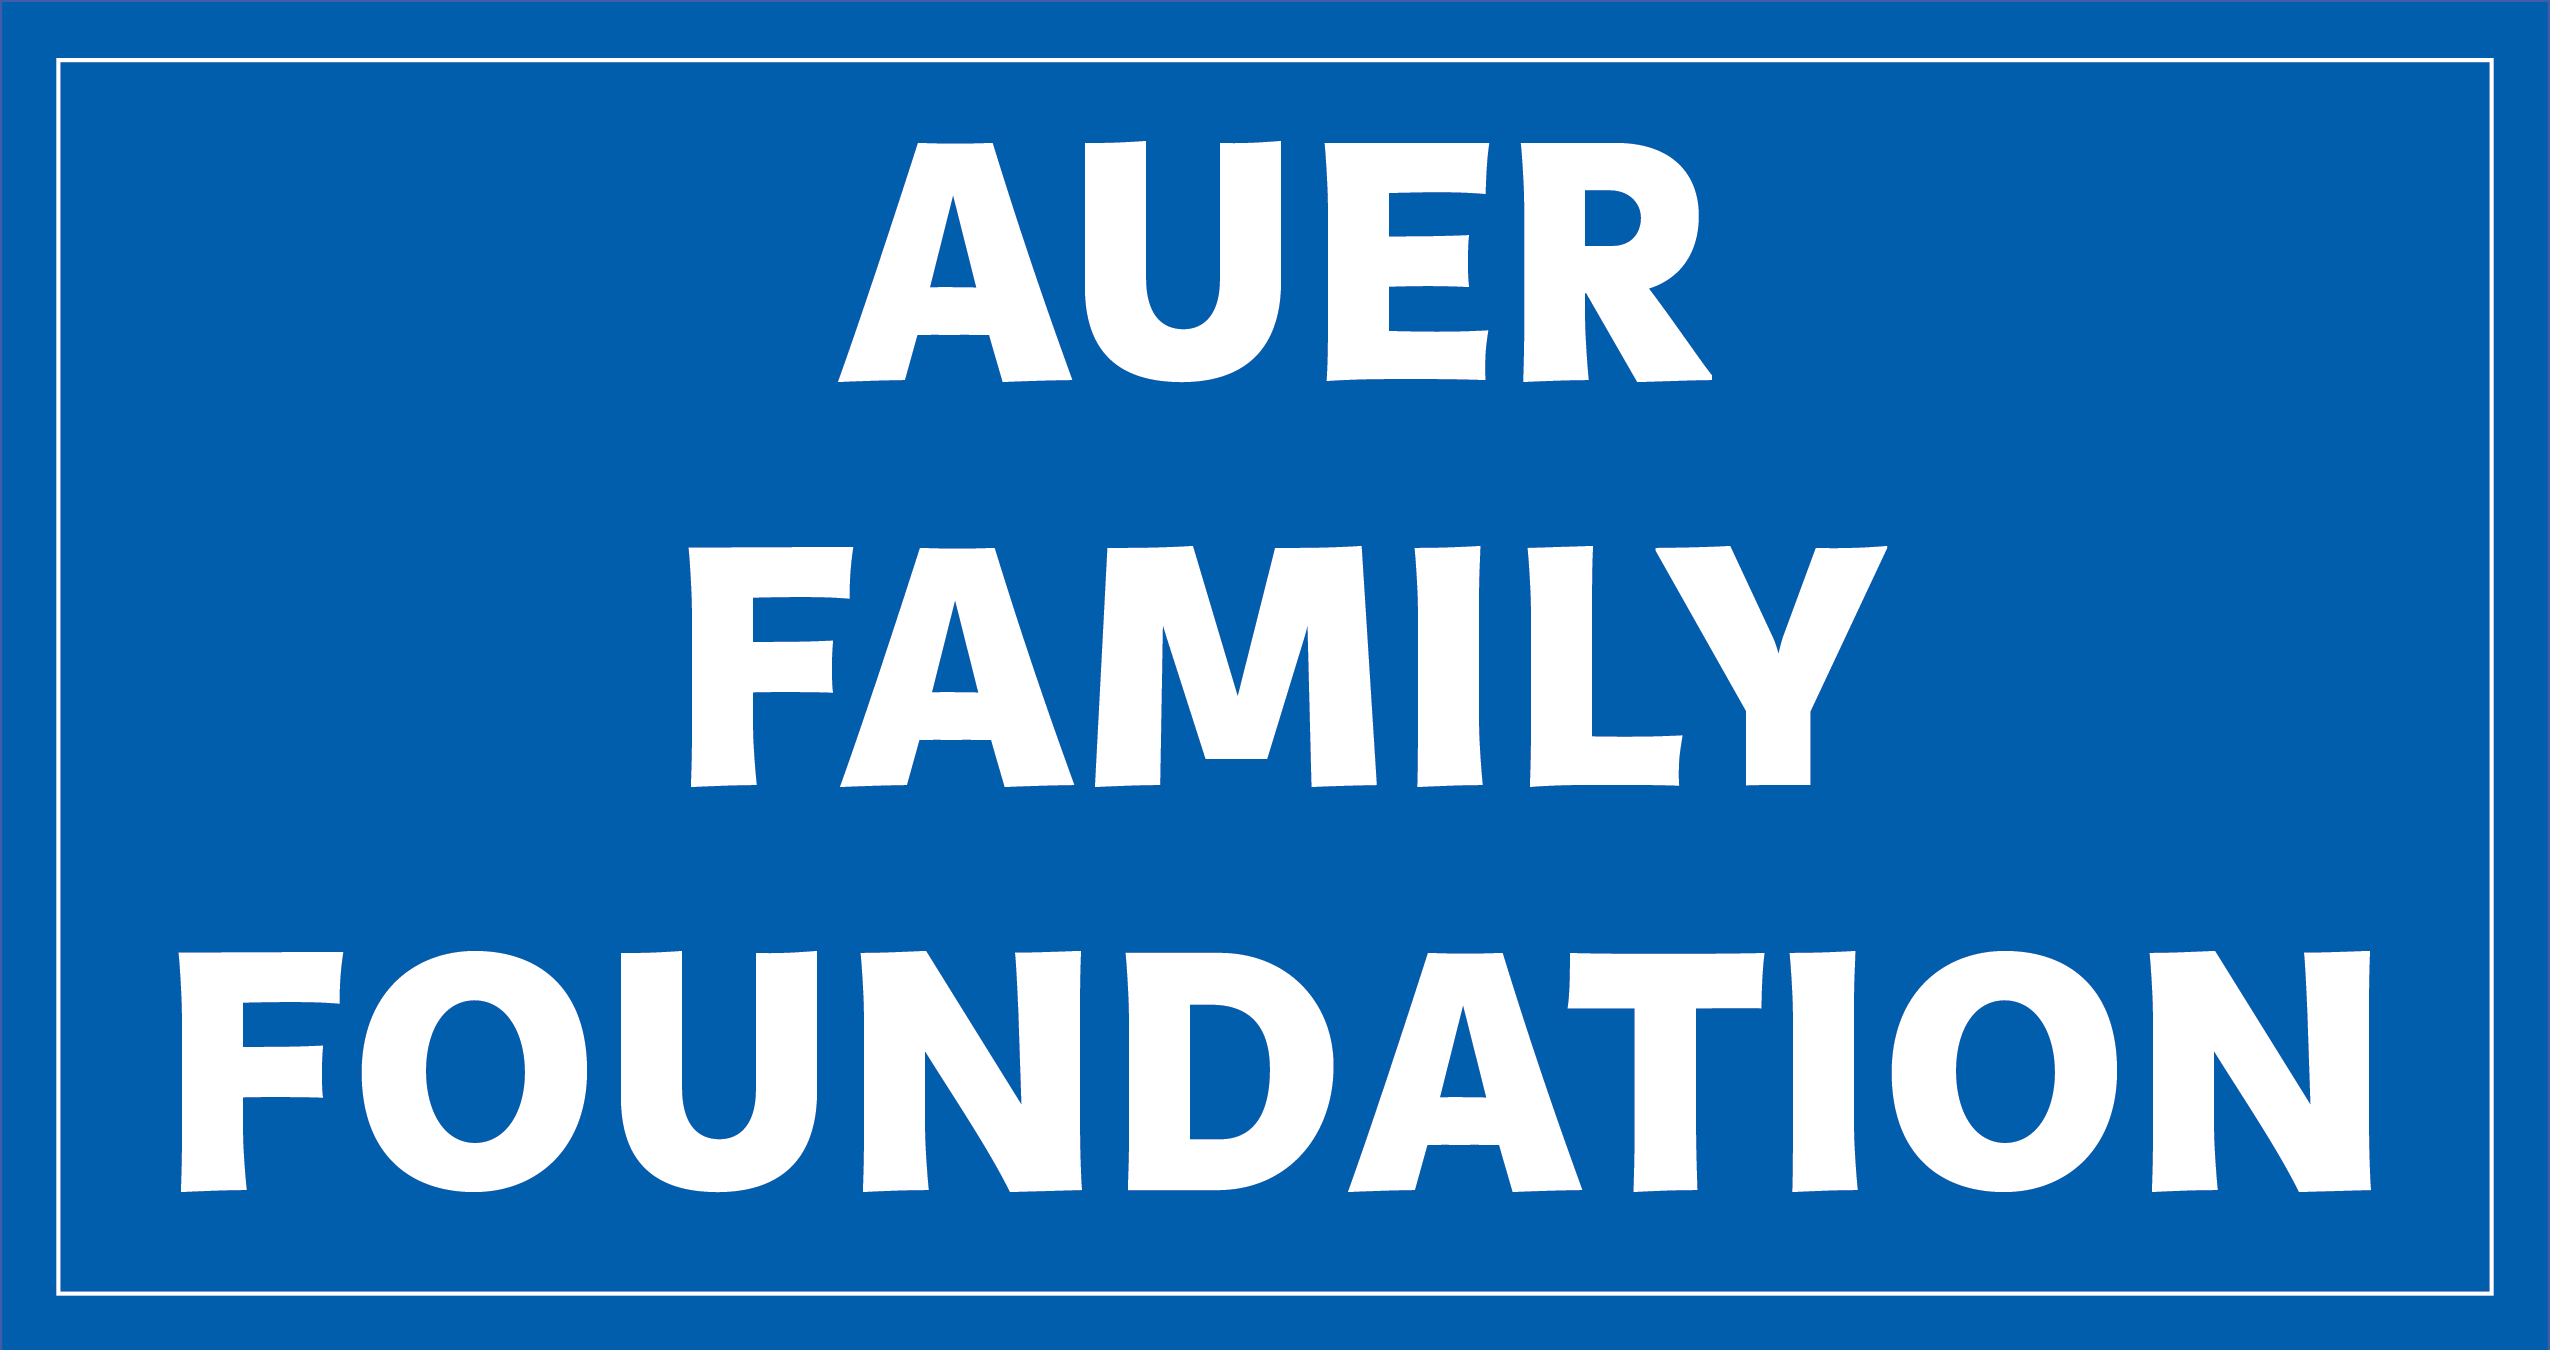 Auer Family Foundation